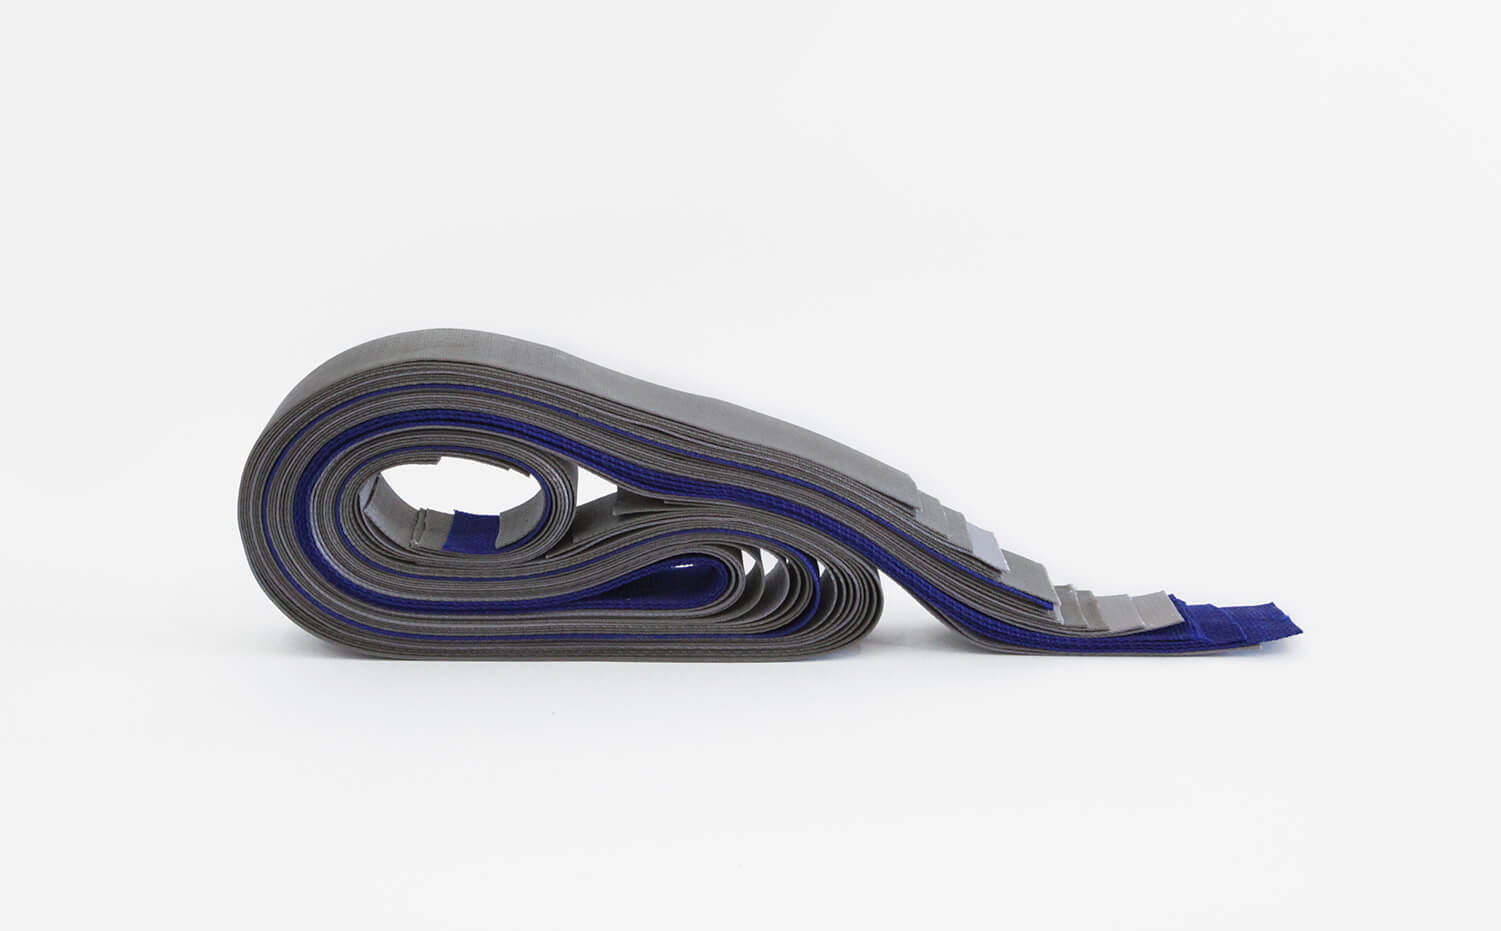 Gabriela Salazar
                                        'for For Closure', 2013
                                        5 3/4 x 18 x 2 Inches
                                        polyester seat belt webbing
                                        